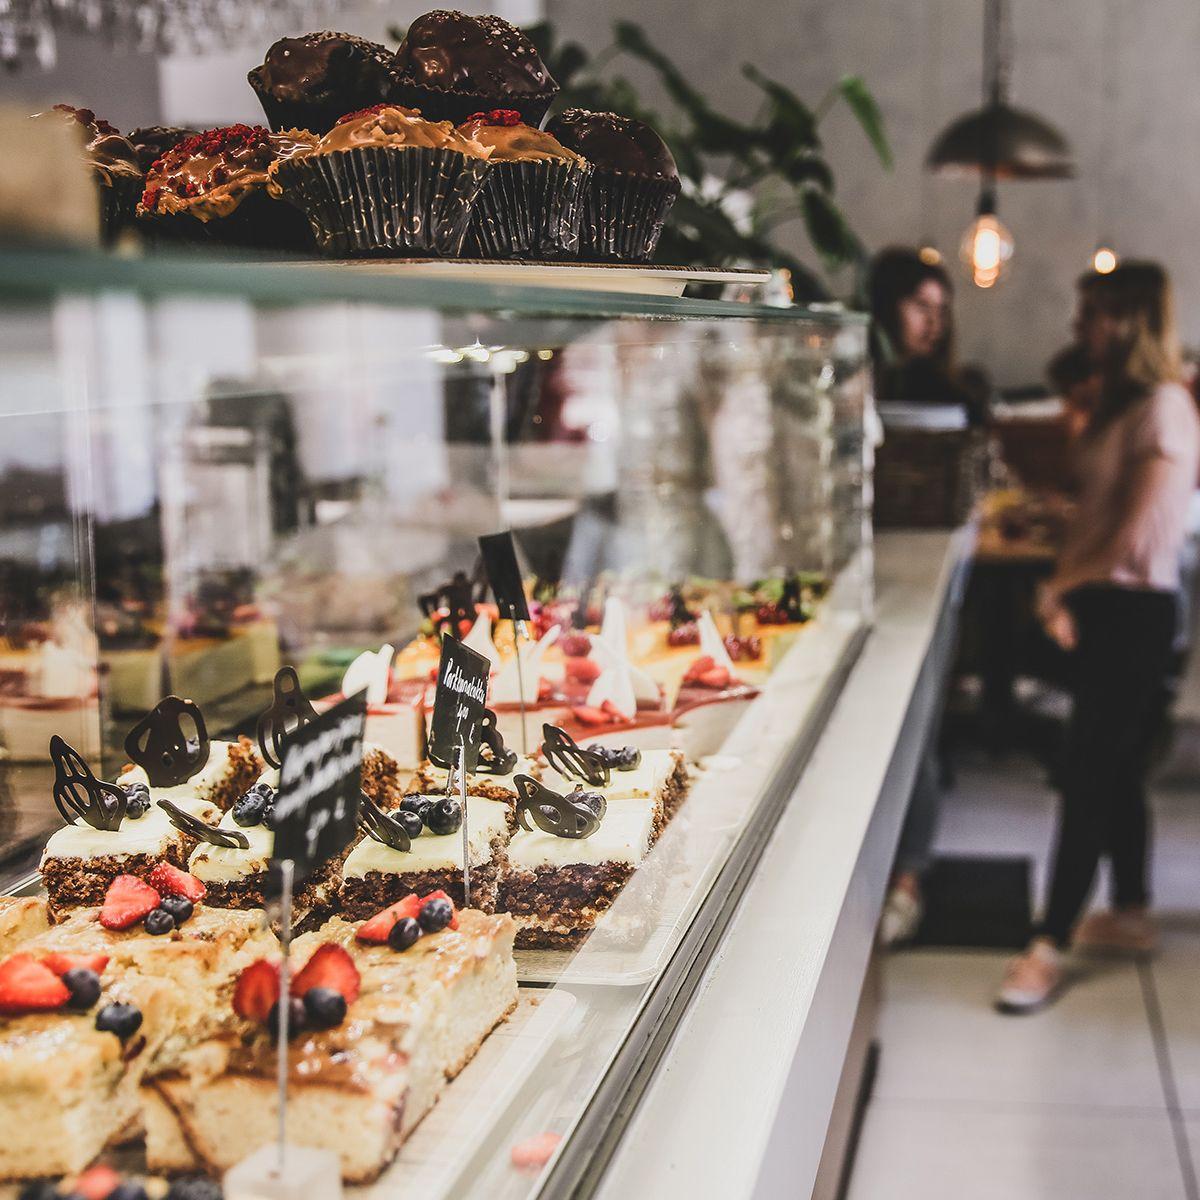 A window display of cakes and other pastries at Fontana.